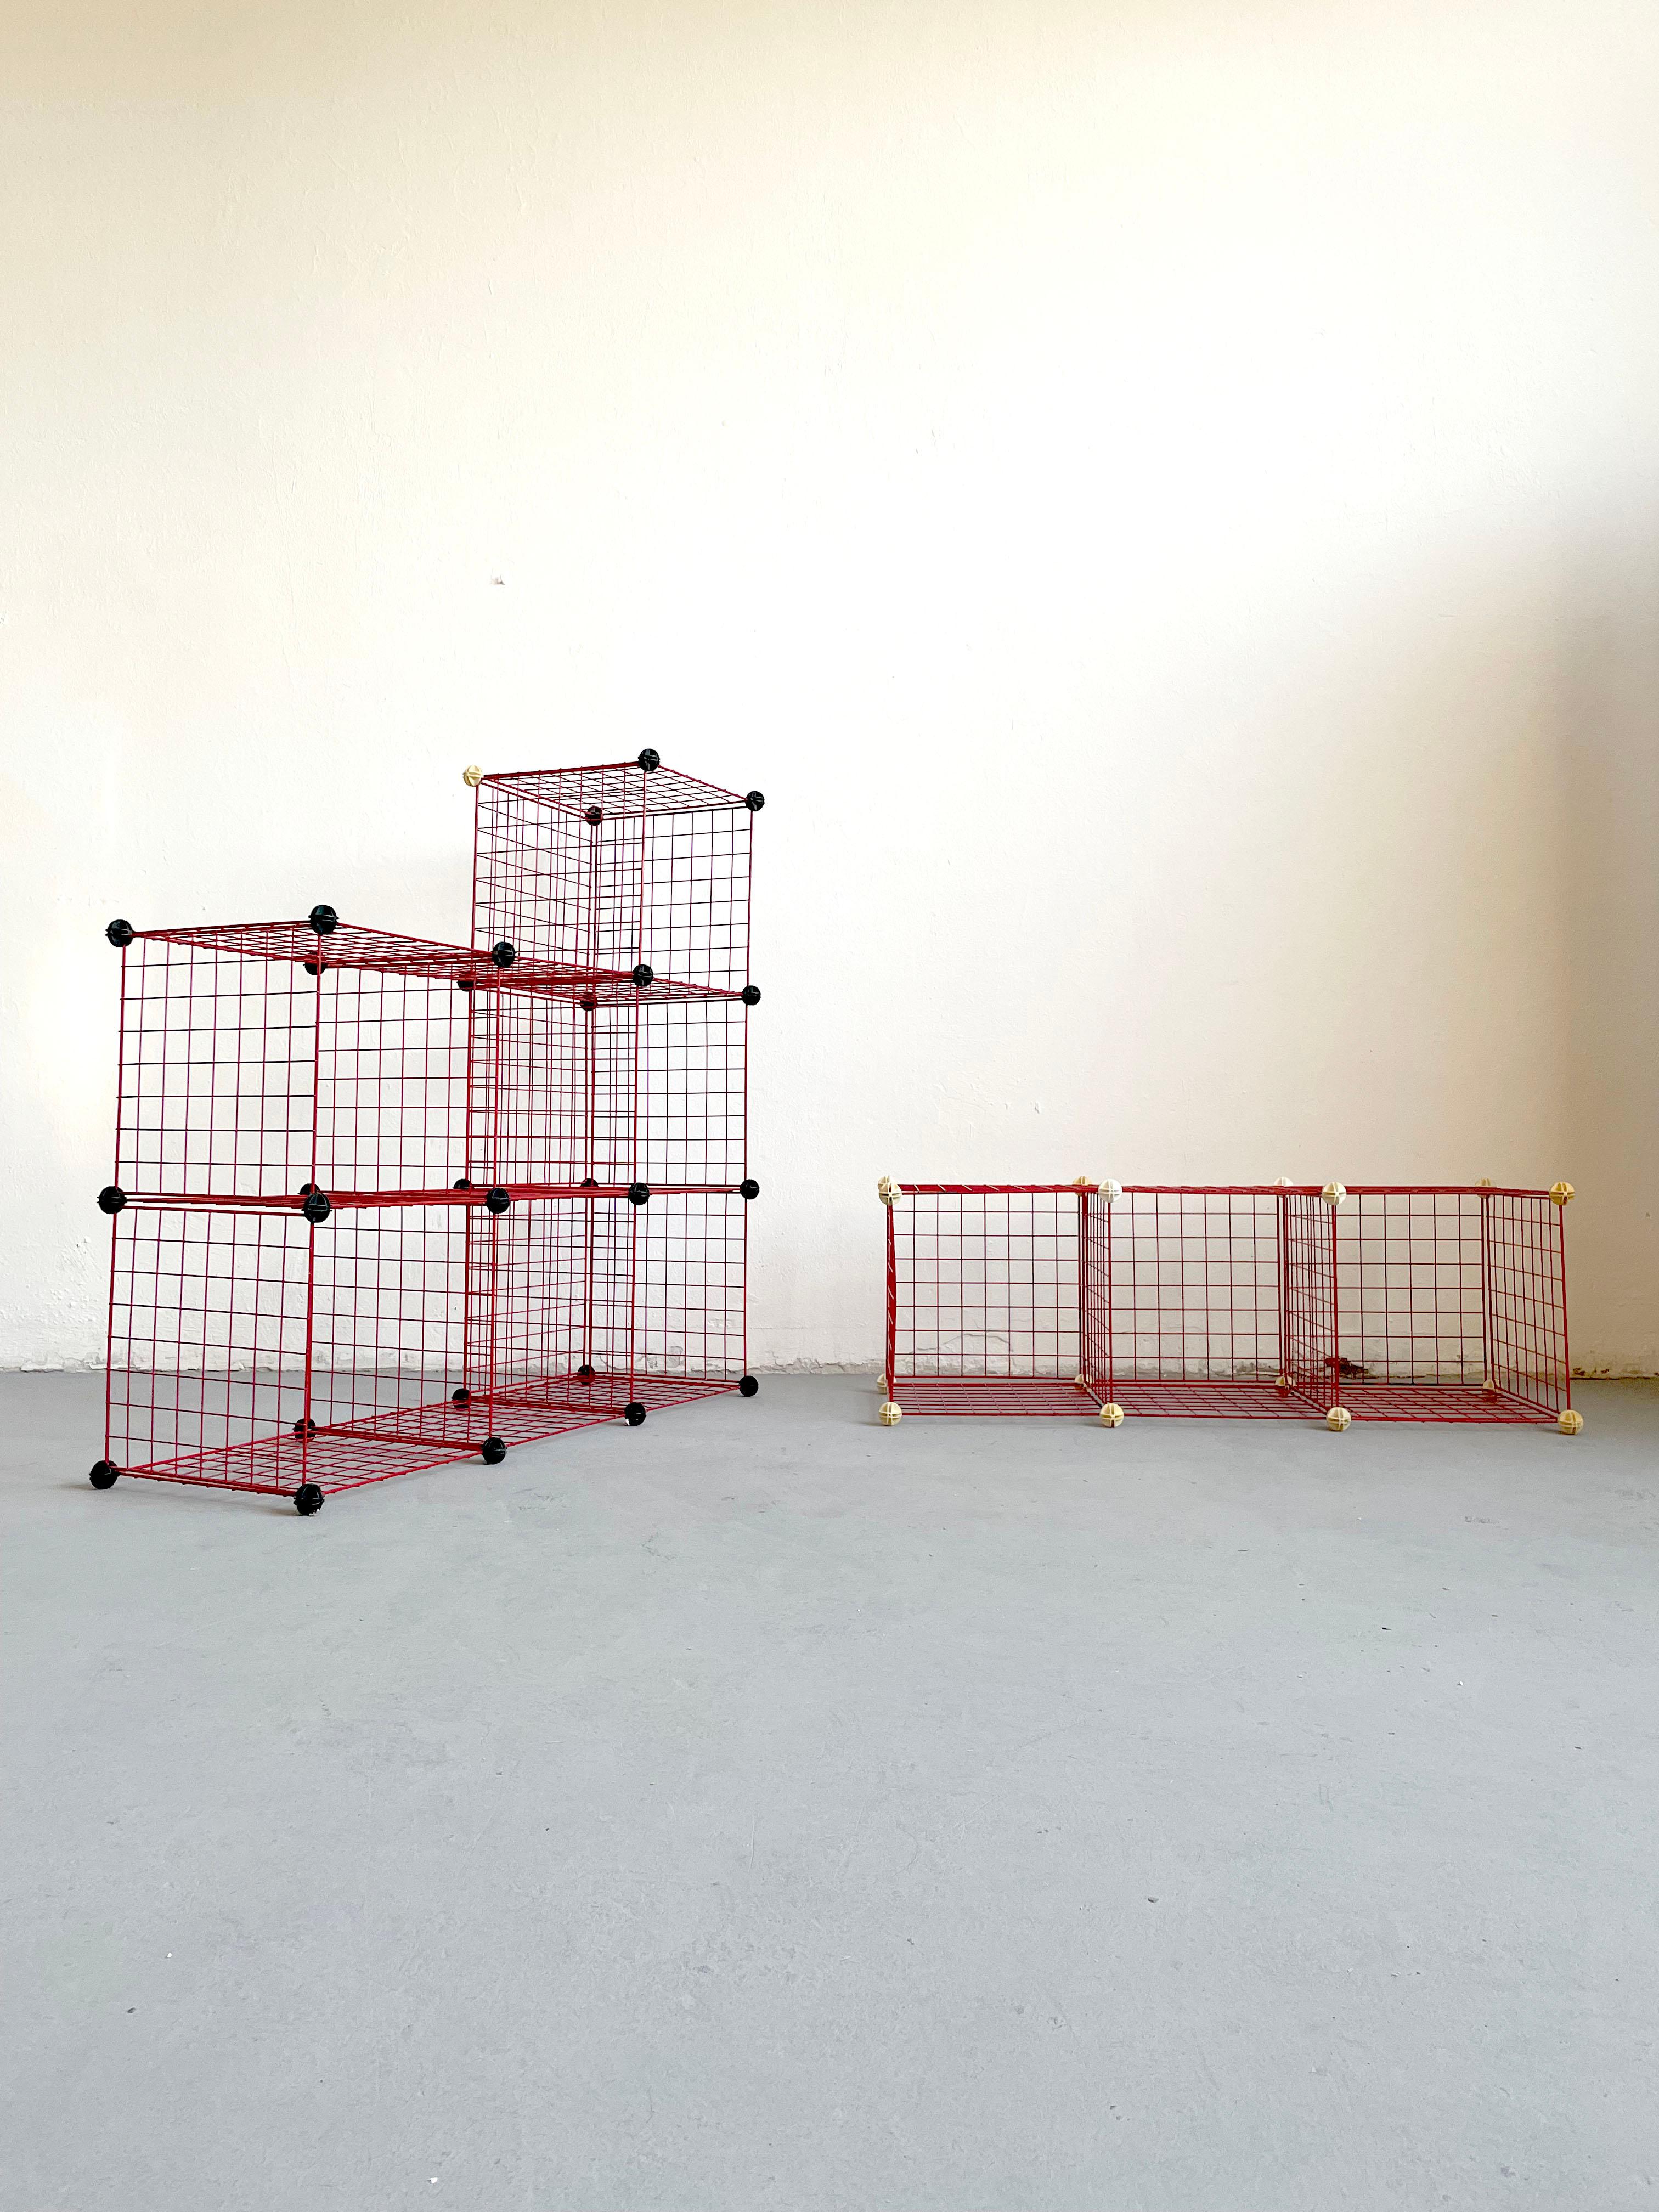 Vintage modular metal shelves from the 1980s.
This set consists of 36 red metal panels measuring 40 x 40 cm and 44 connecting plastic bowls in black and white color.

The set can be used in many combinations to make shelves, small tables, and